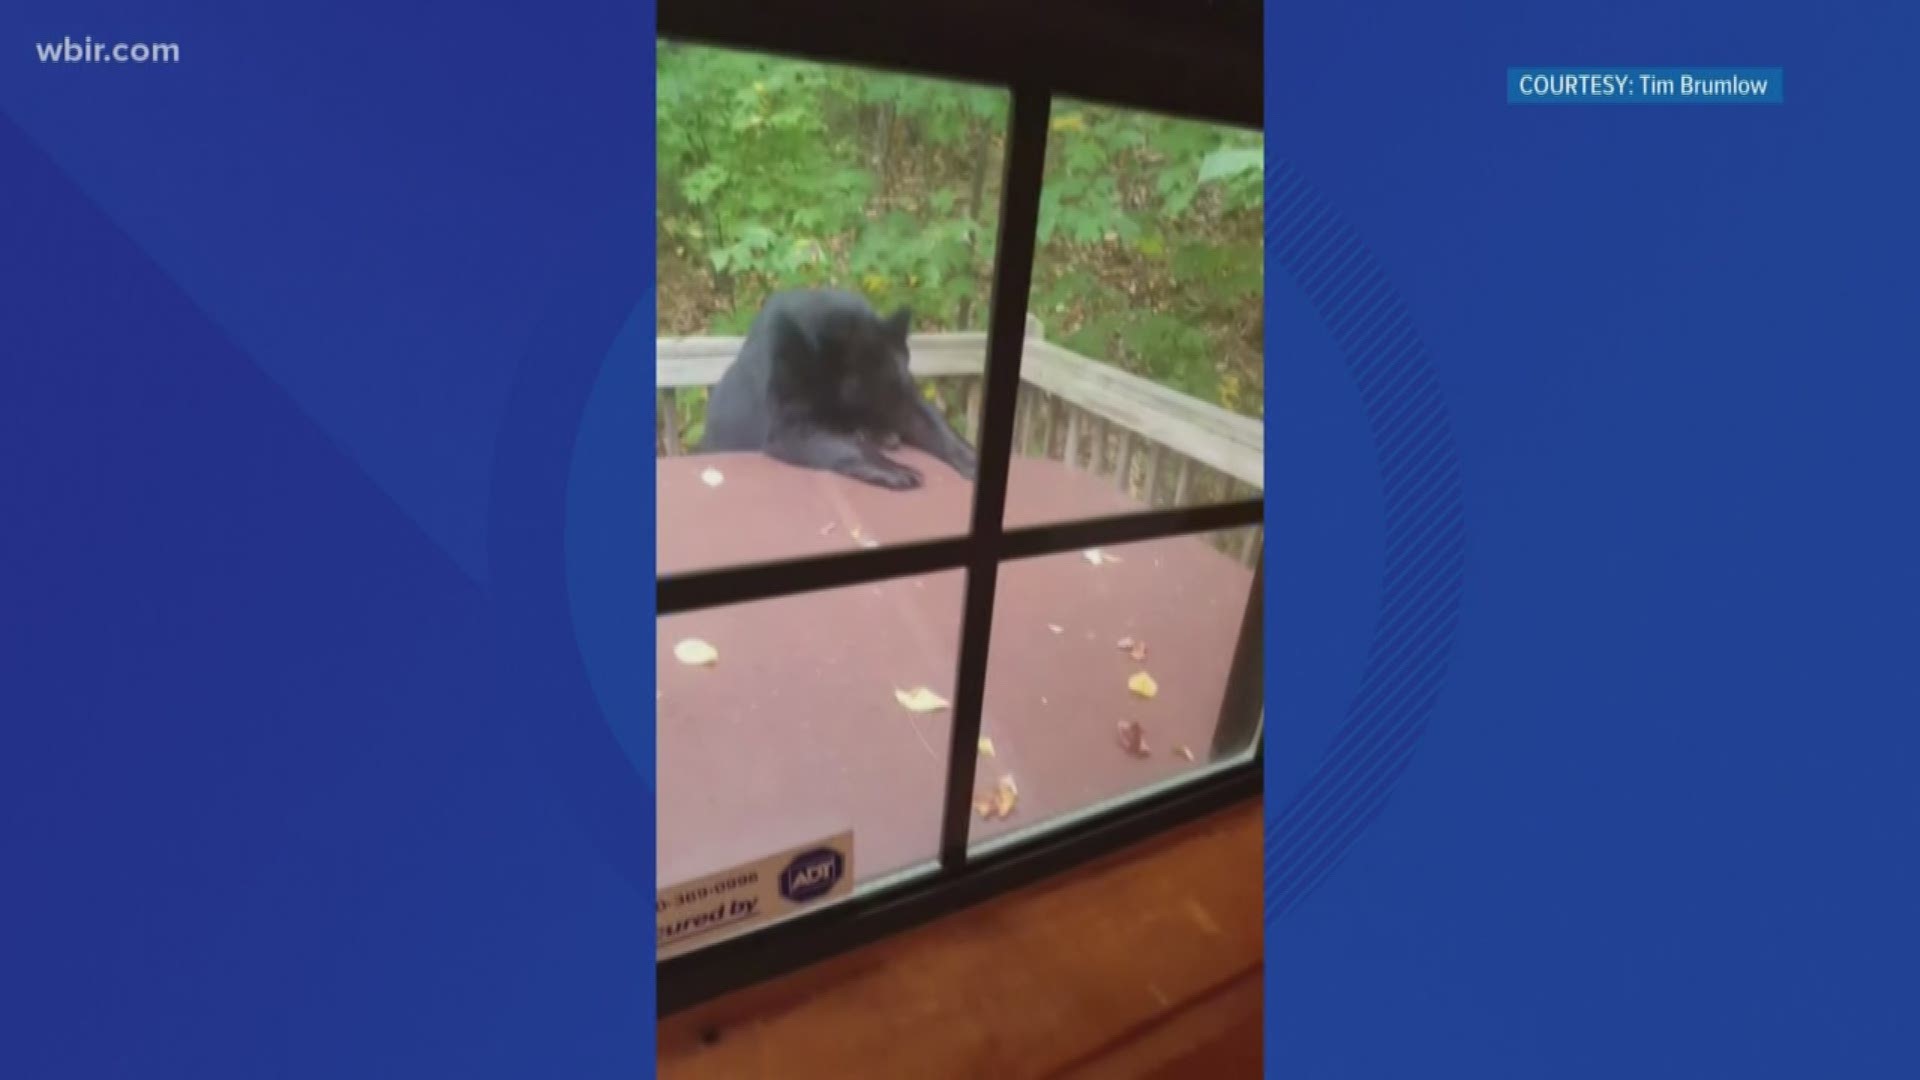 Tim Brunlow and his family looked outside last weekend and saw a bear pulling the lid off the hot tub on the porch of the cabin they were staying in.